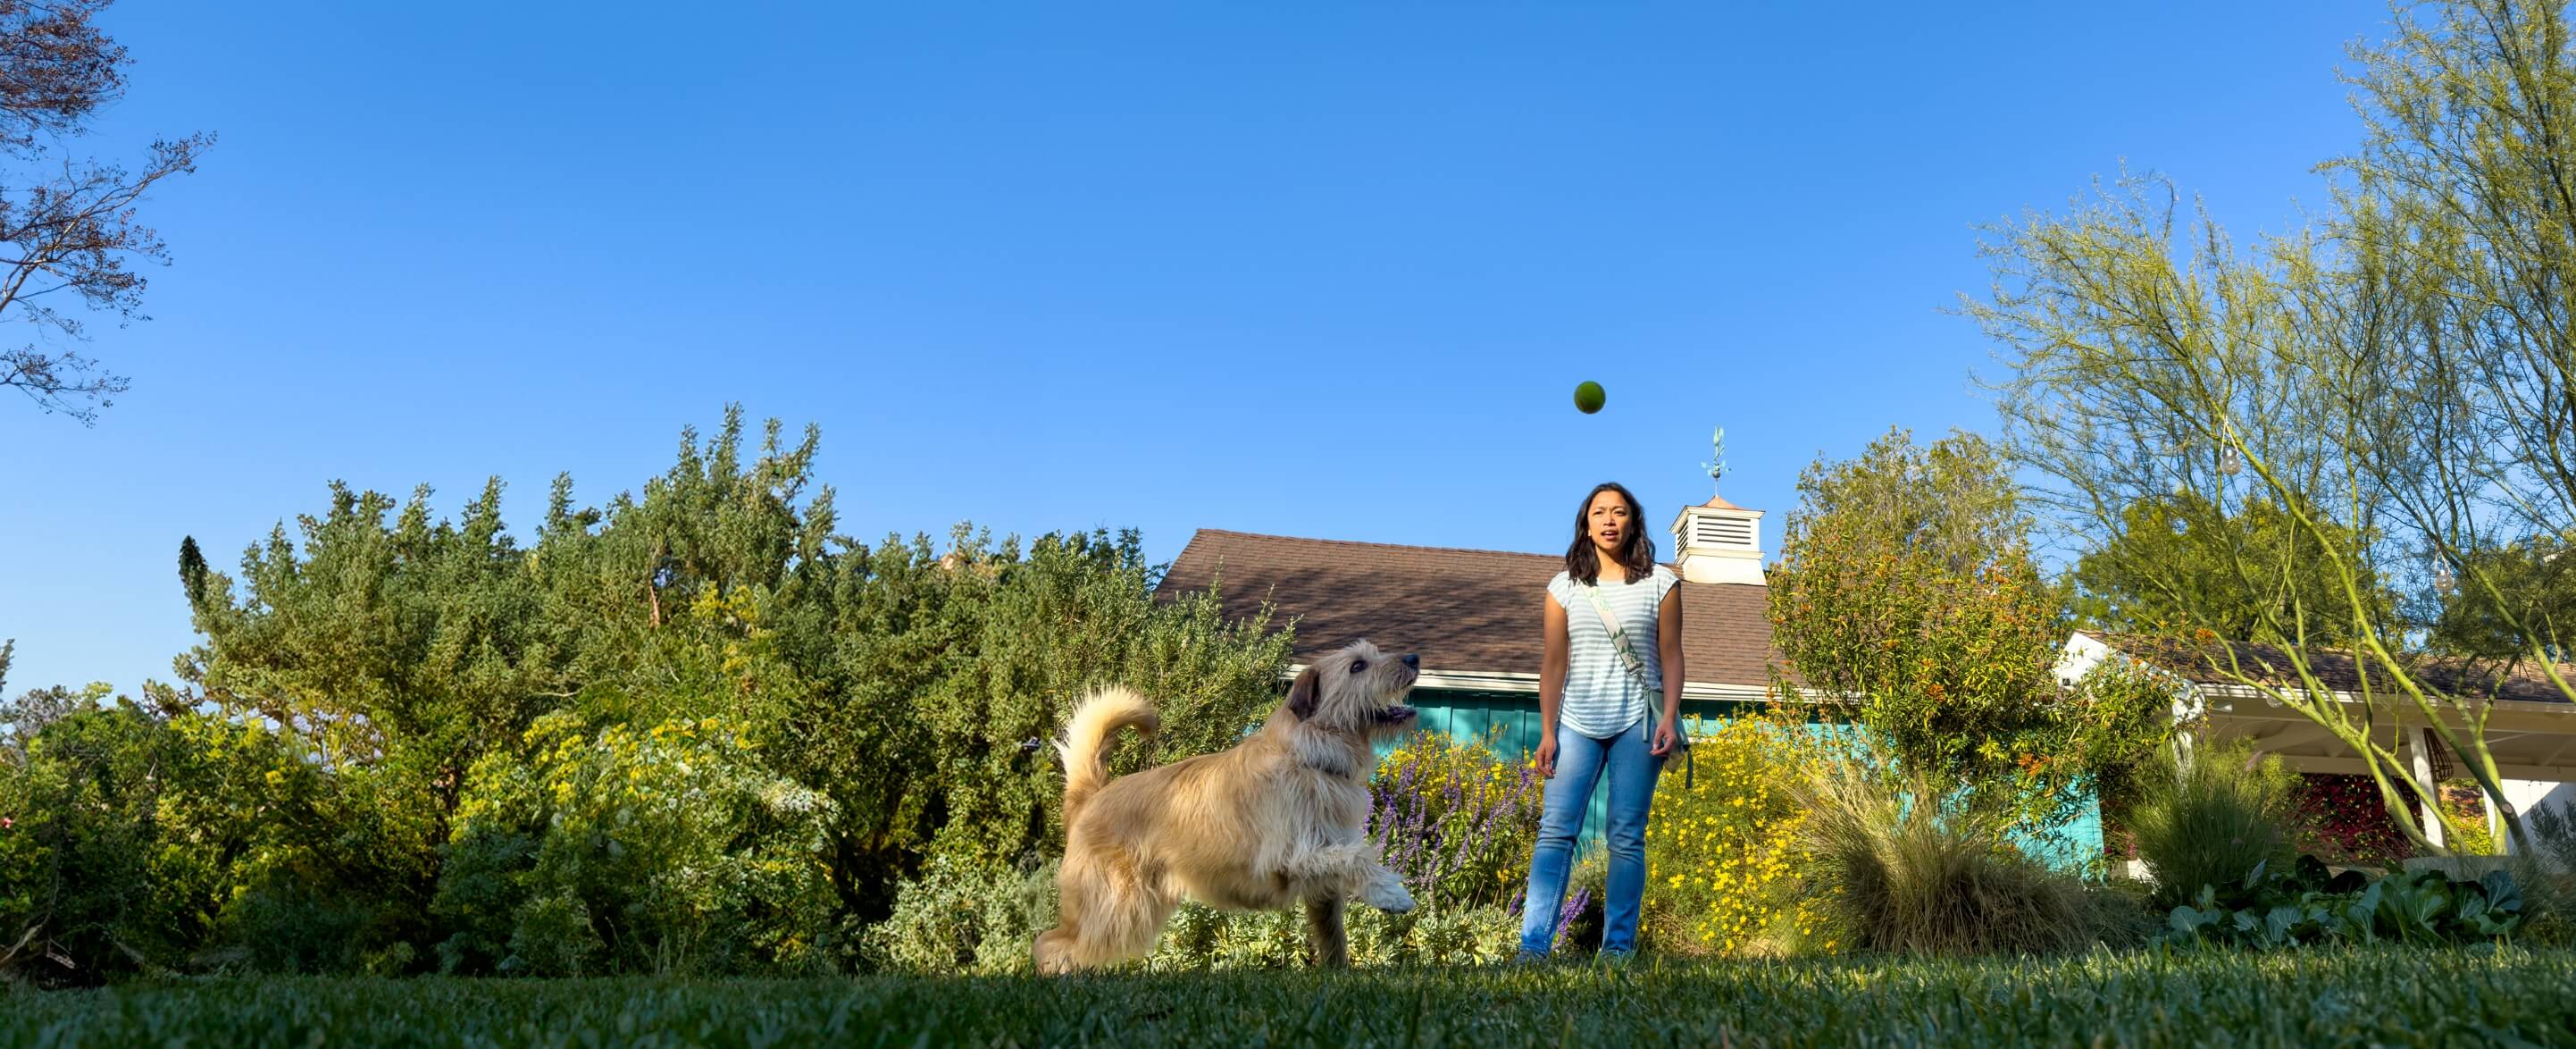 Woman playing fetch with a dog saying I didn't think endo pain relief would be possible. I'm glad I was wrong.